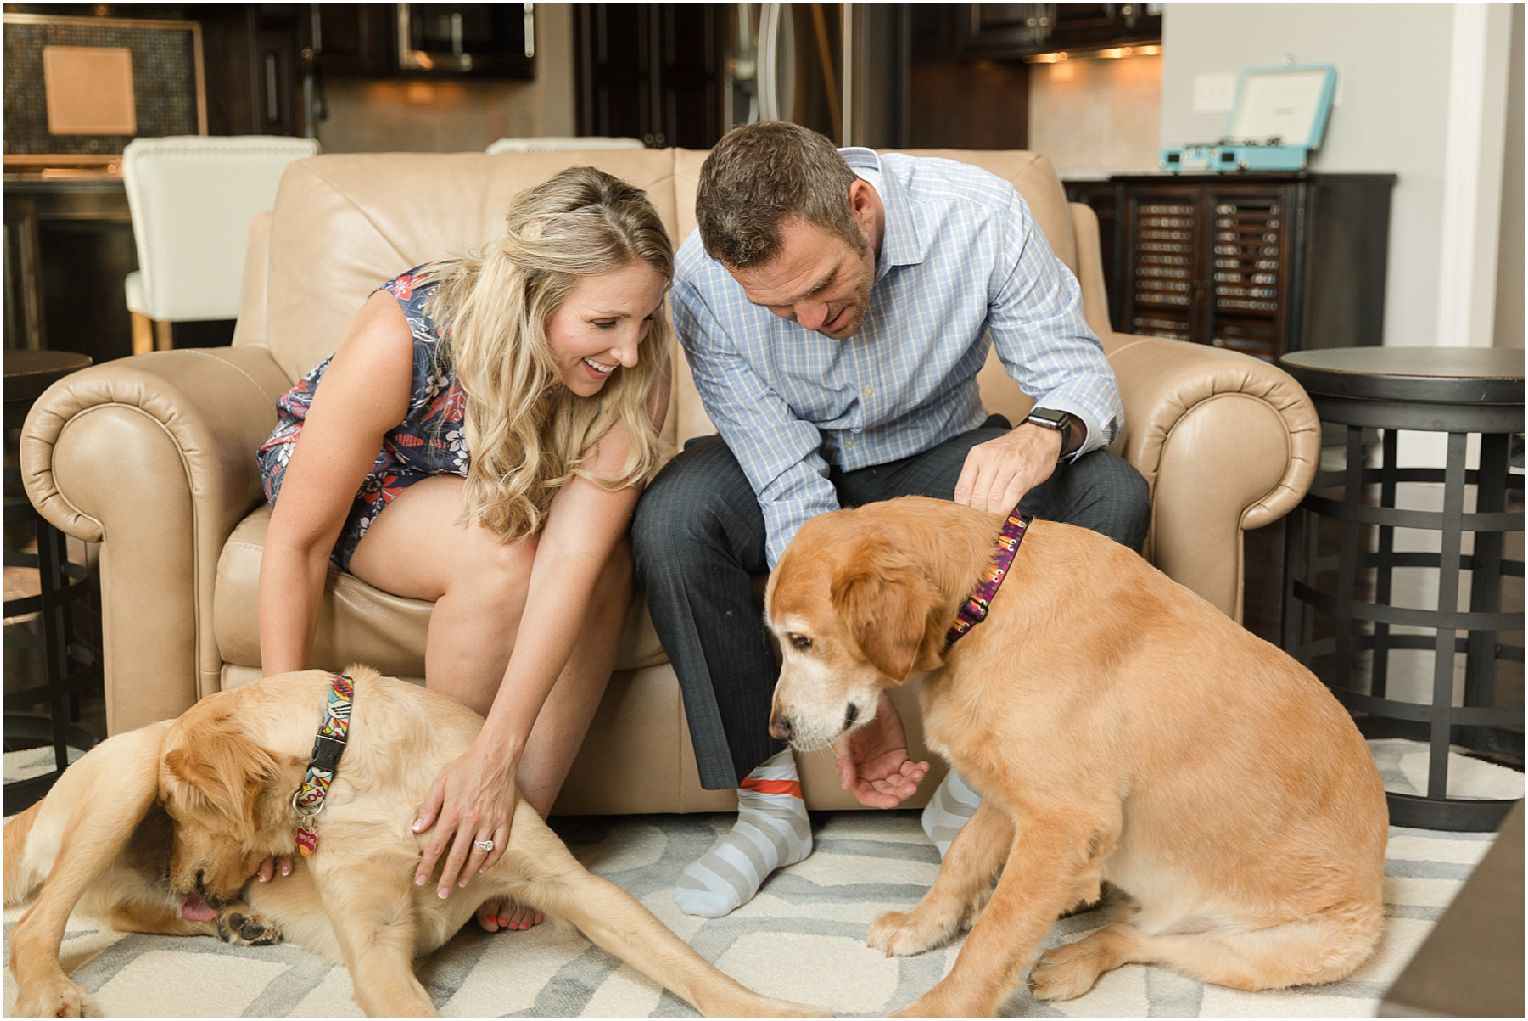 Kansas City Engagement Photos - In home lifestyle session with dogs